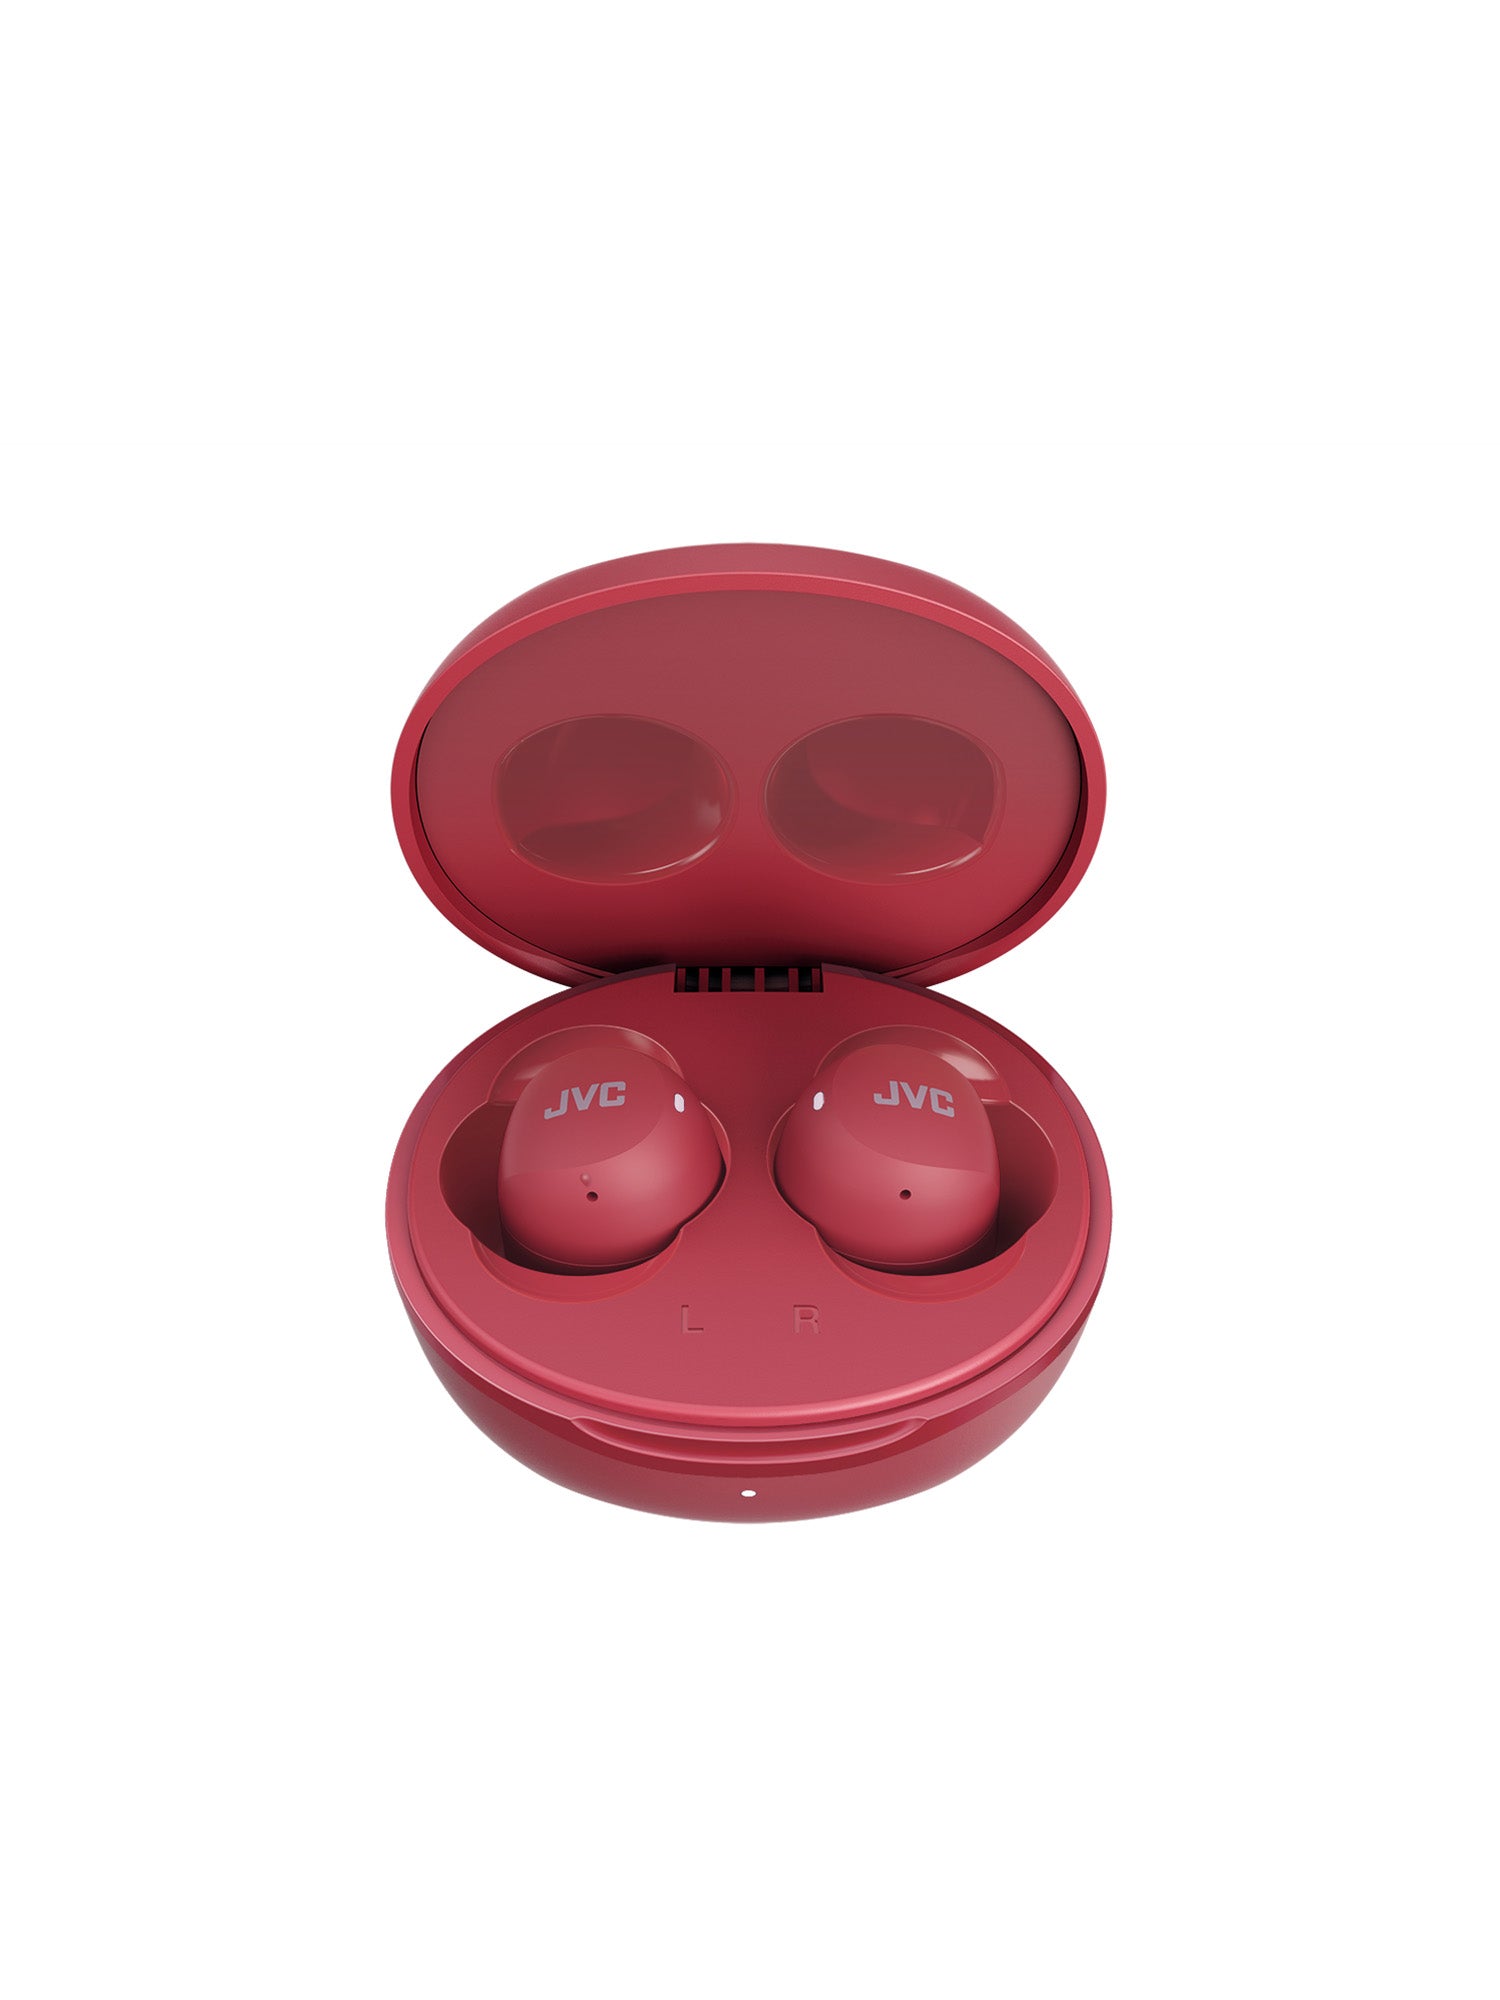 HA-A6T-R in Red charging case by JVC